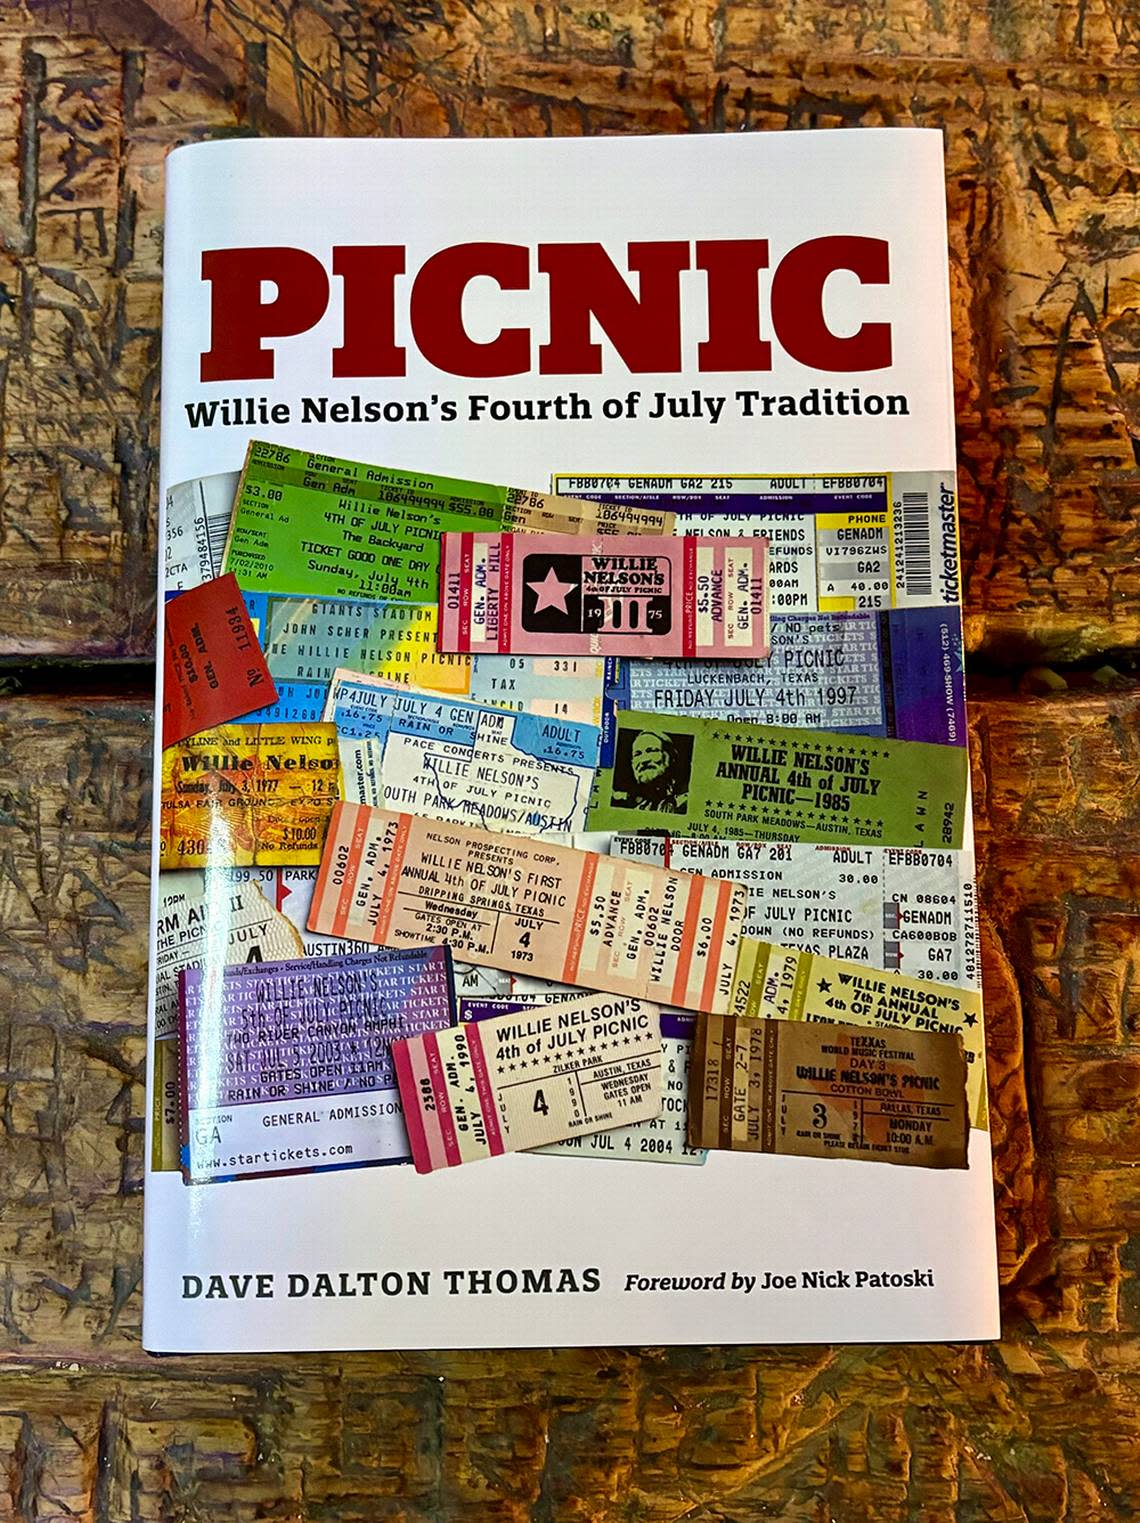 Dave Thomas’ new book “Picnic: Willie Nelson’s Fourth of July Tradition,” is available now.